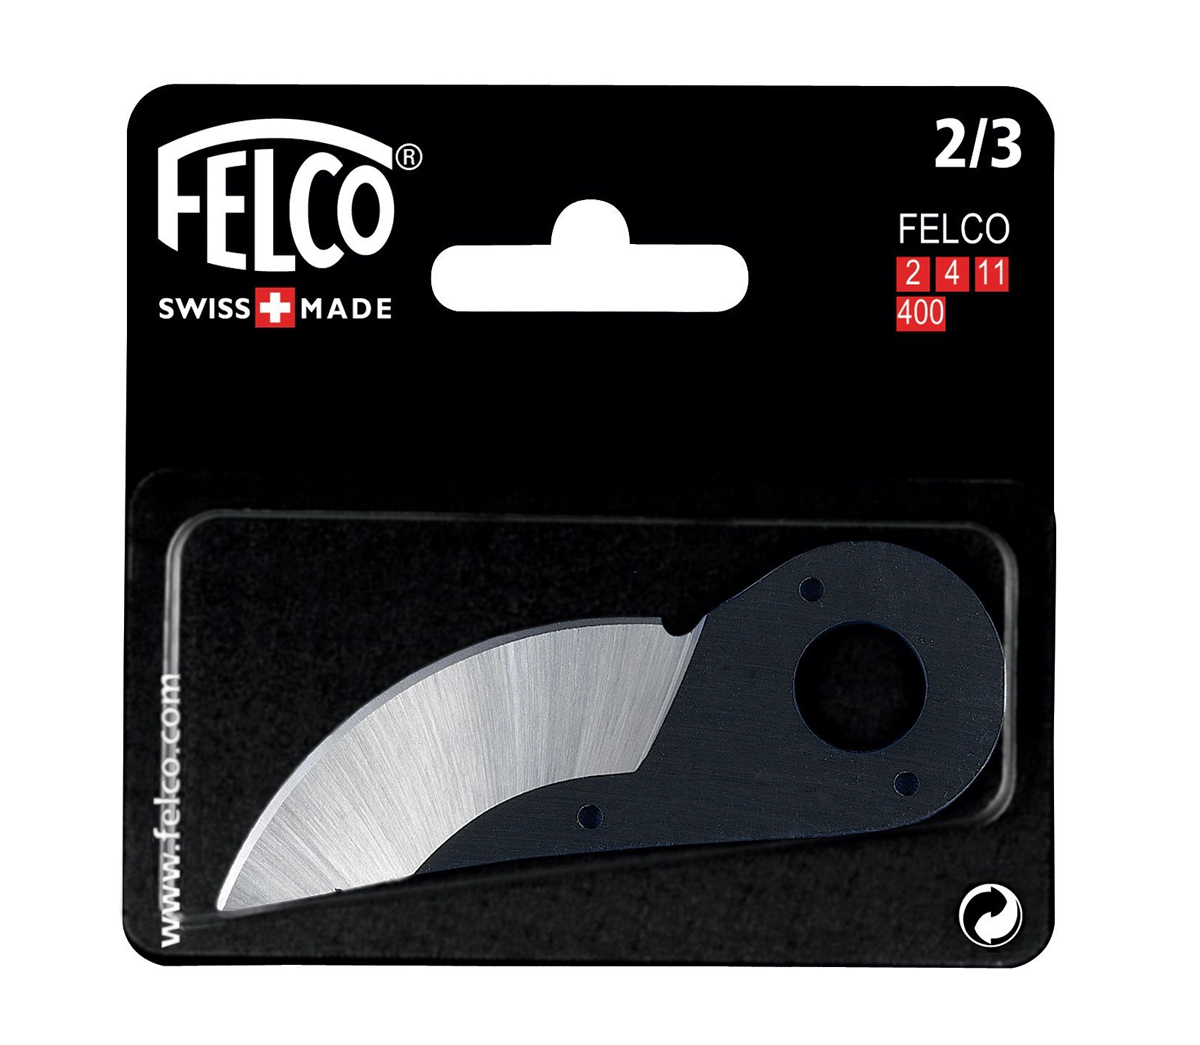 Felco 2 - 3 Cutting Blade for F 2 4 11 - Hand Tools